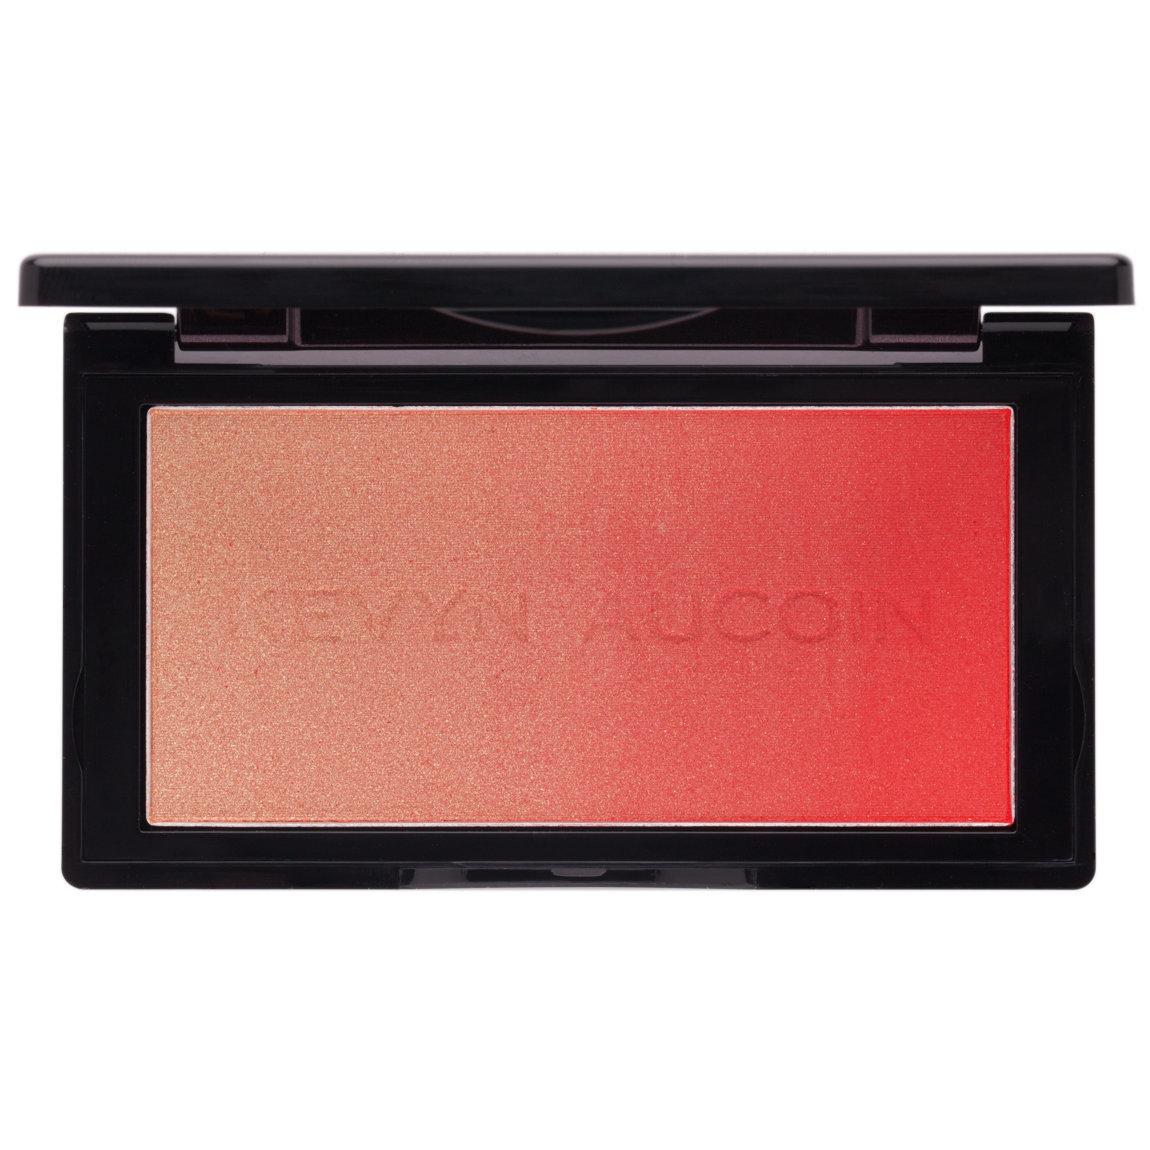 Kevyn Aucoin The Neo-Blush Sunset alternative view 1 - product swatch.